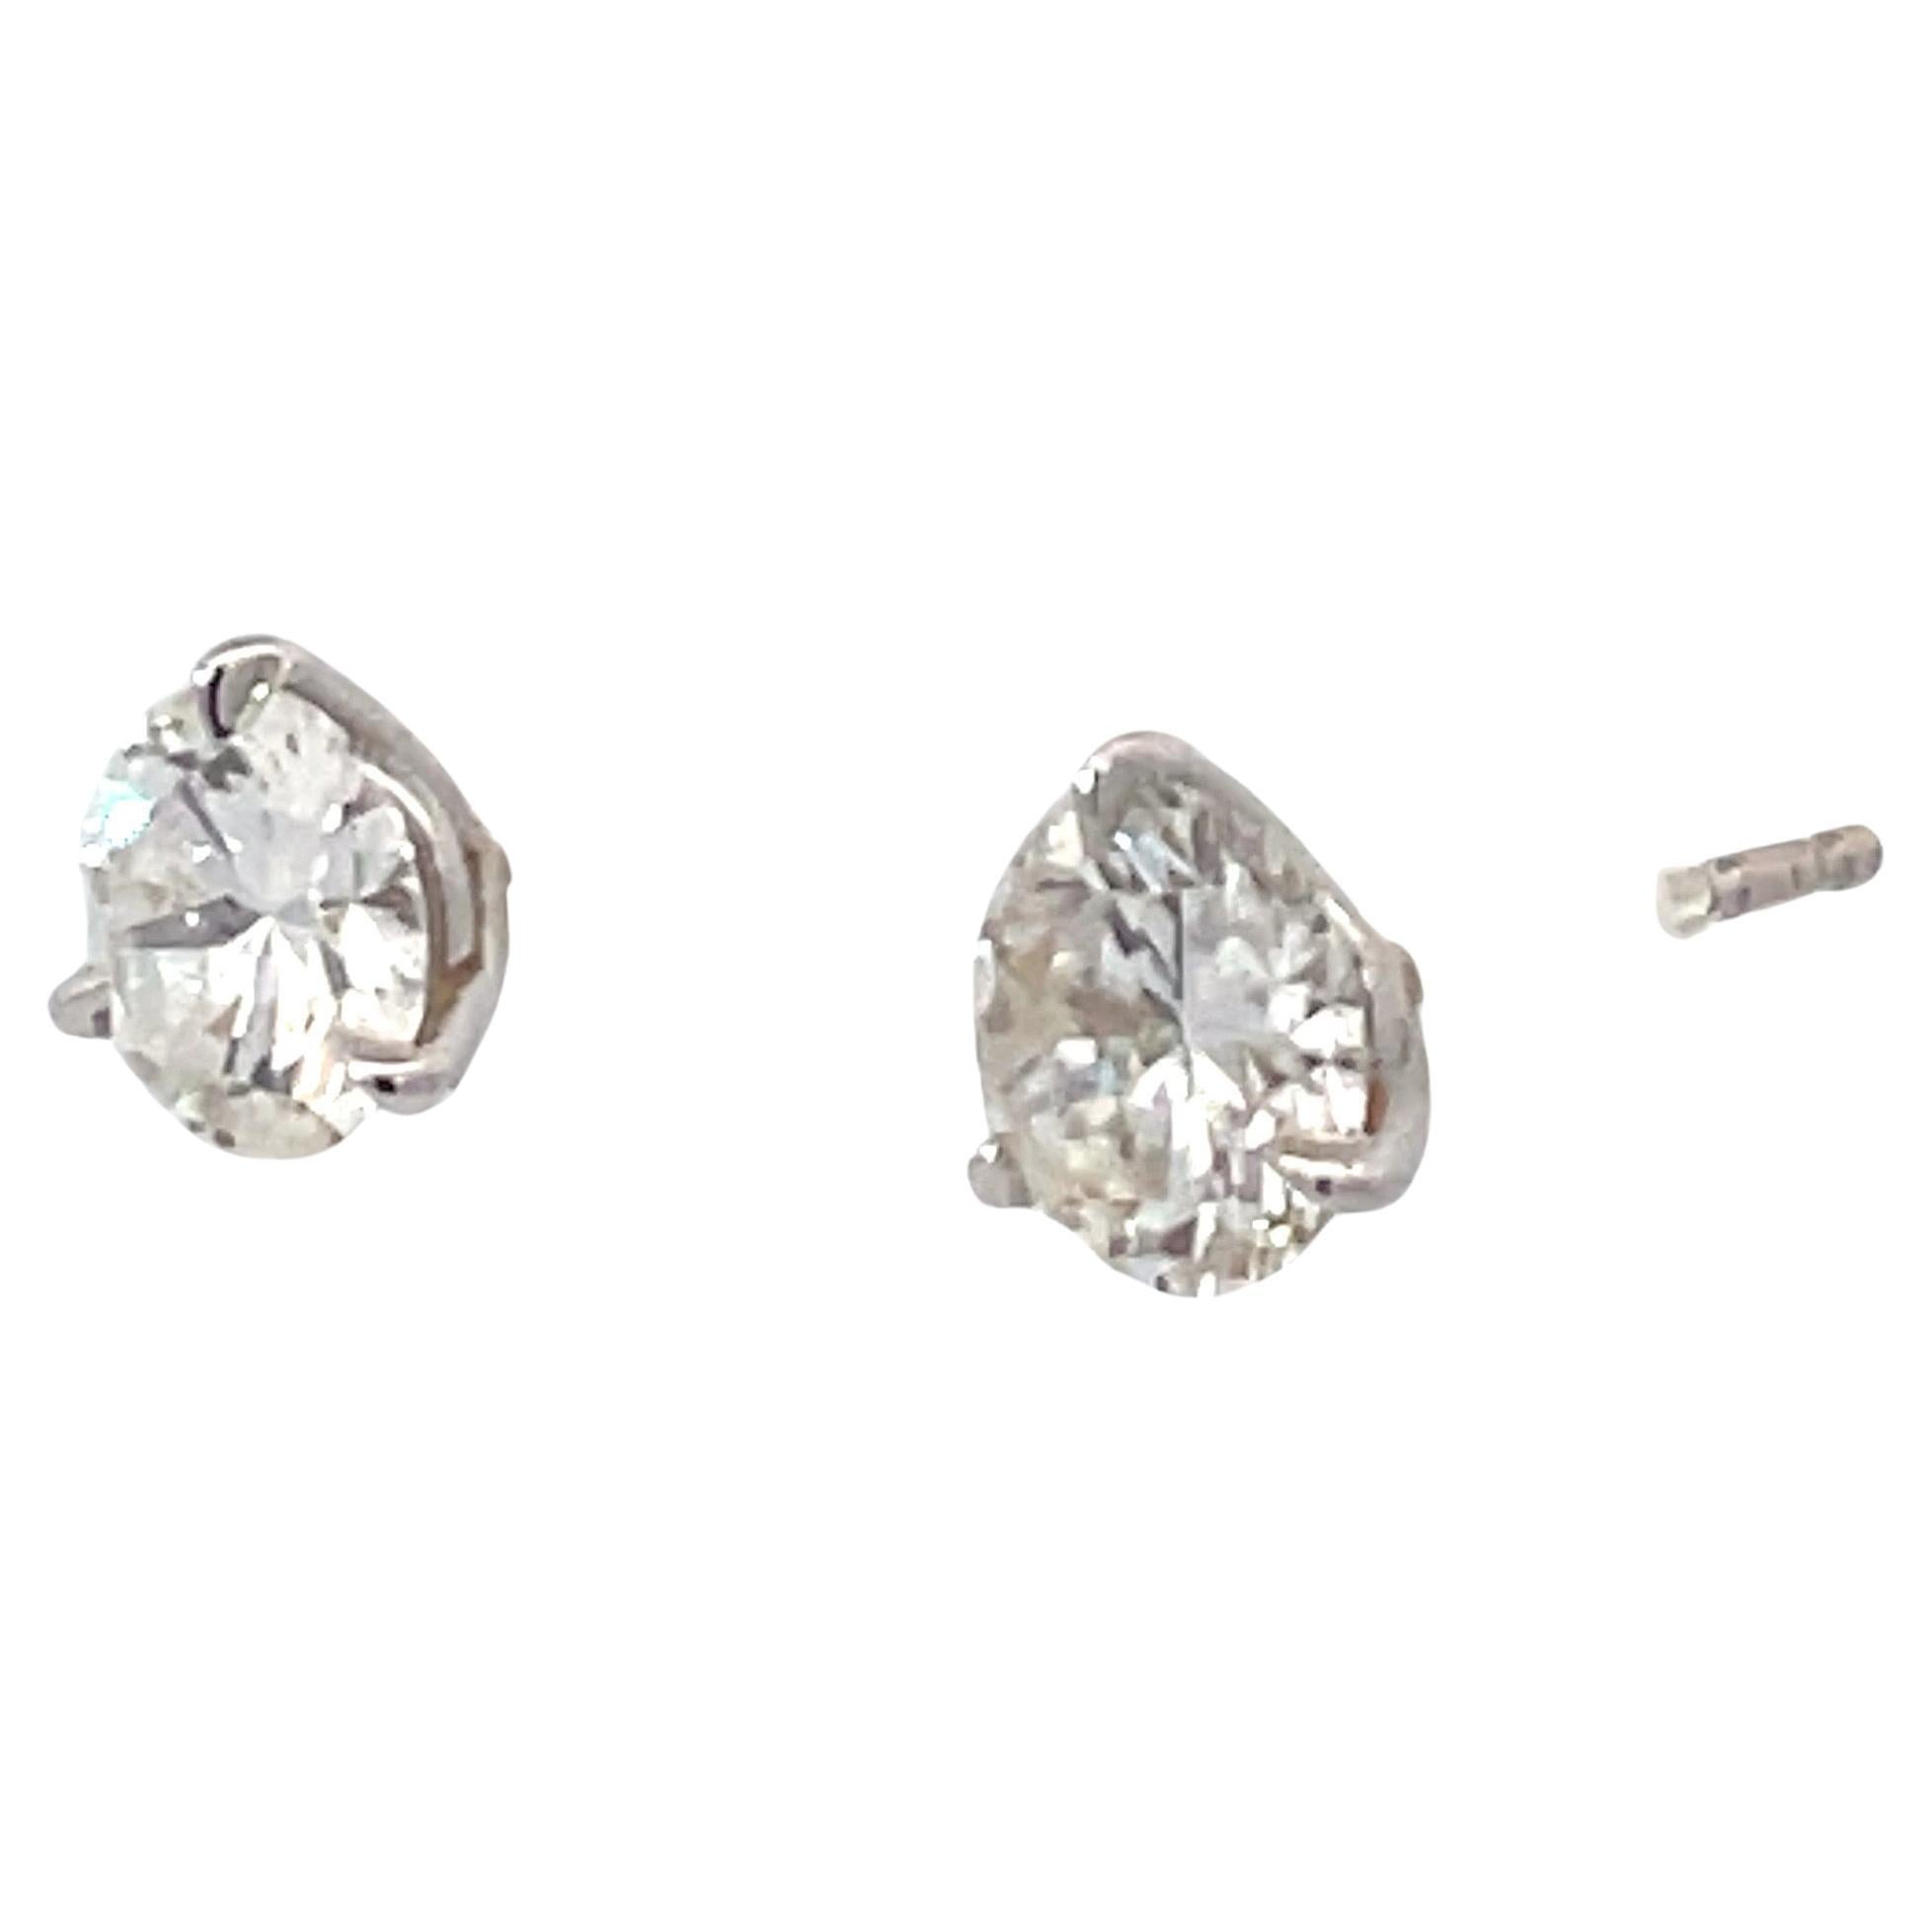 Round Cut GIA Certified Diamond Stud Earrings 2.10 Carats G-H SI1-2 18 Karat White Gold For Sale